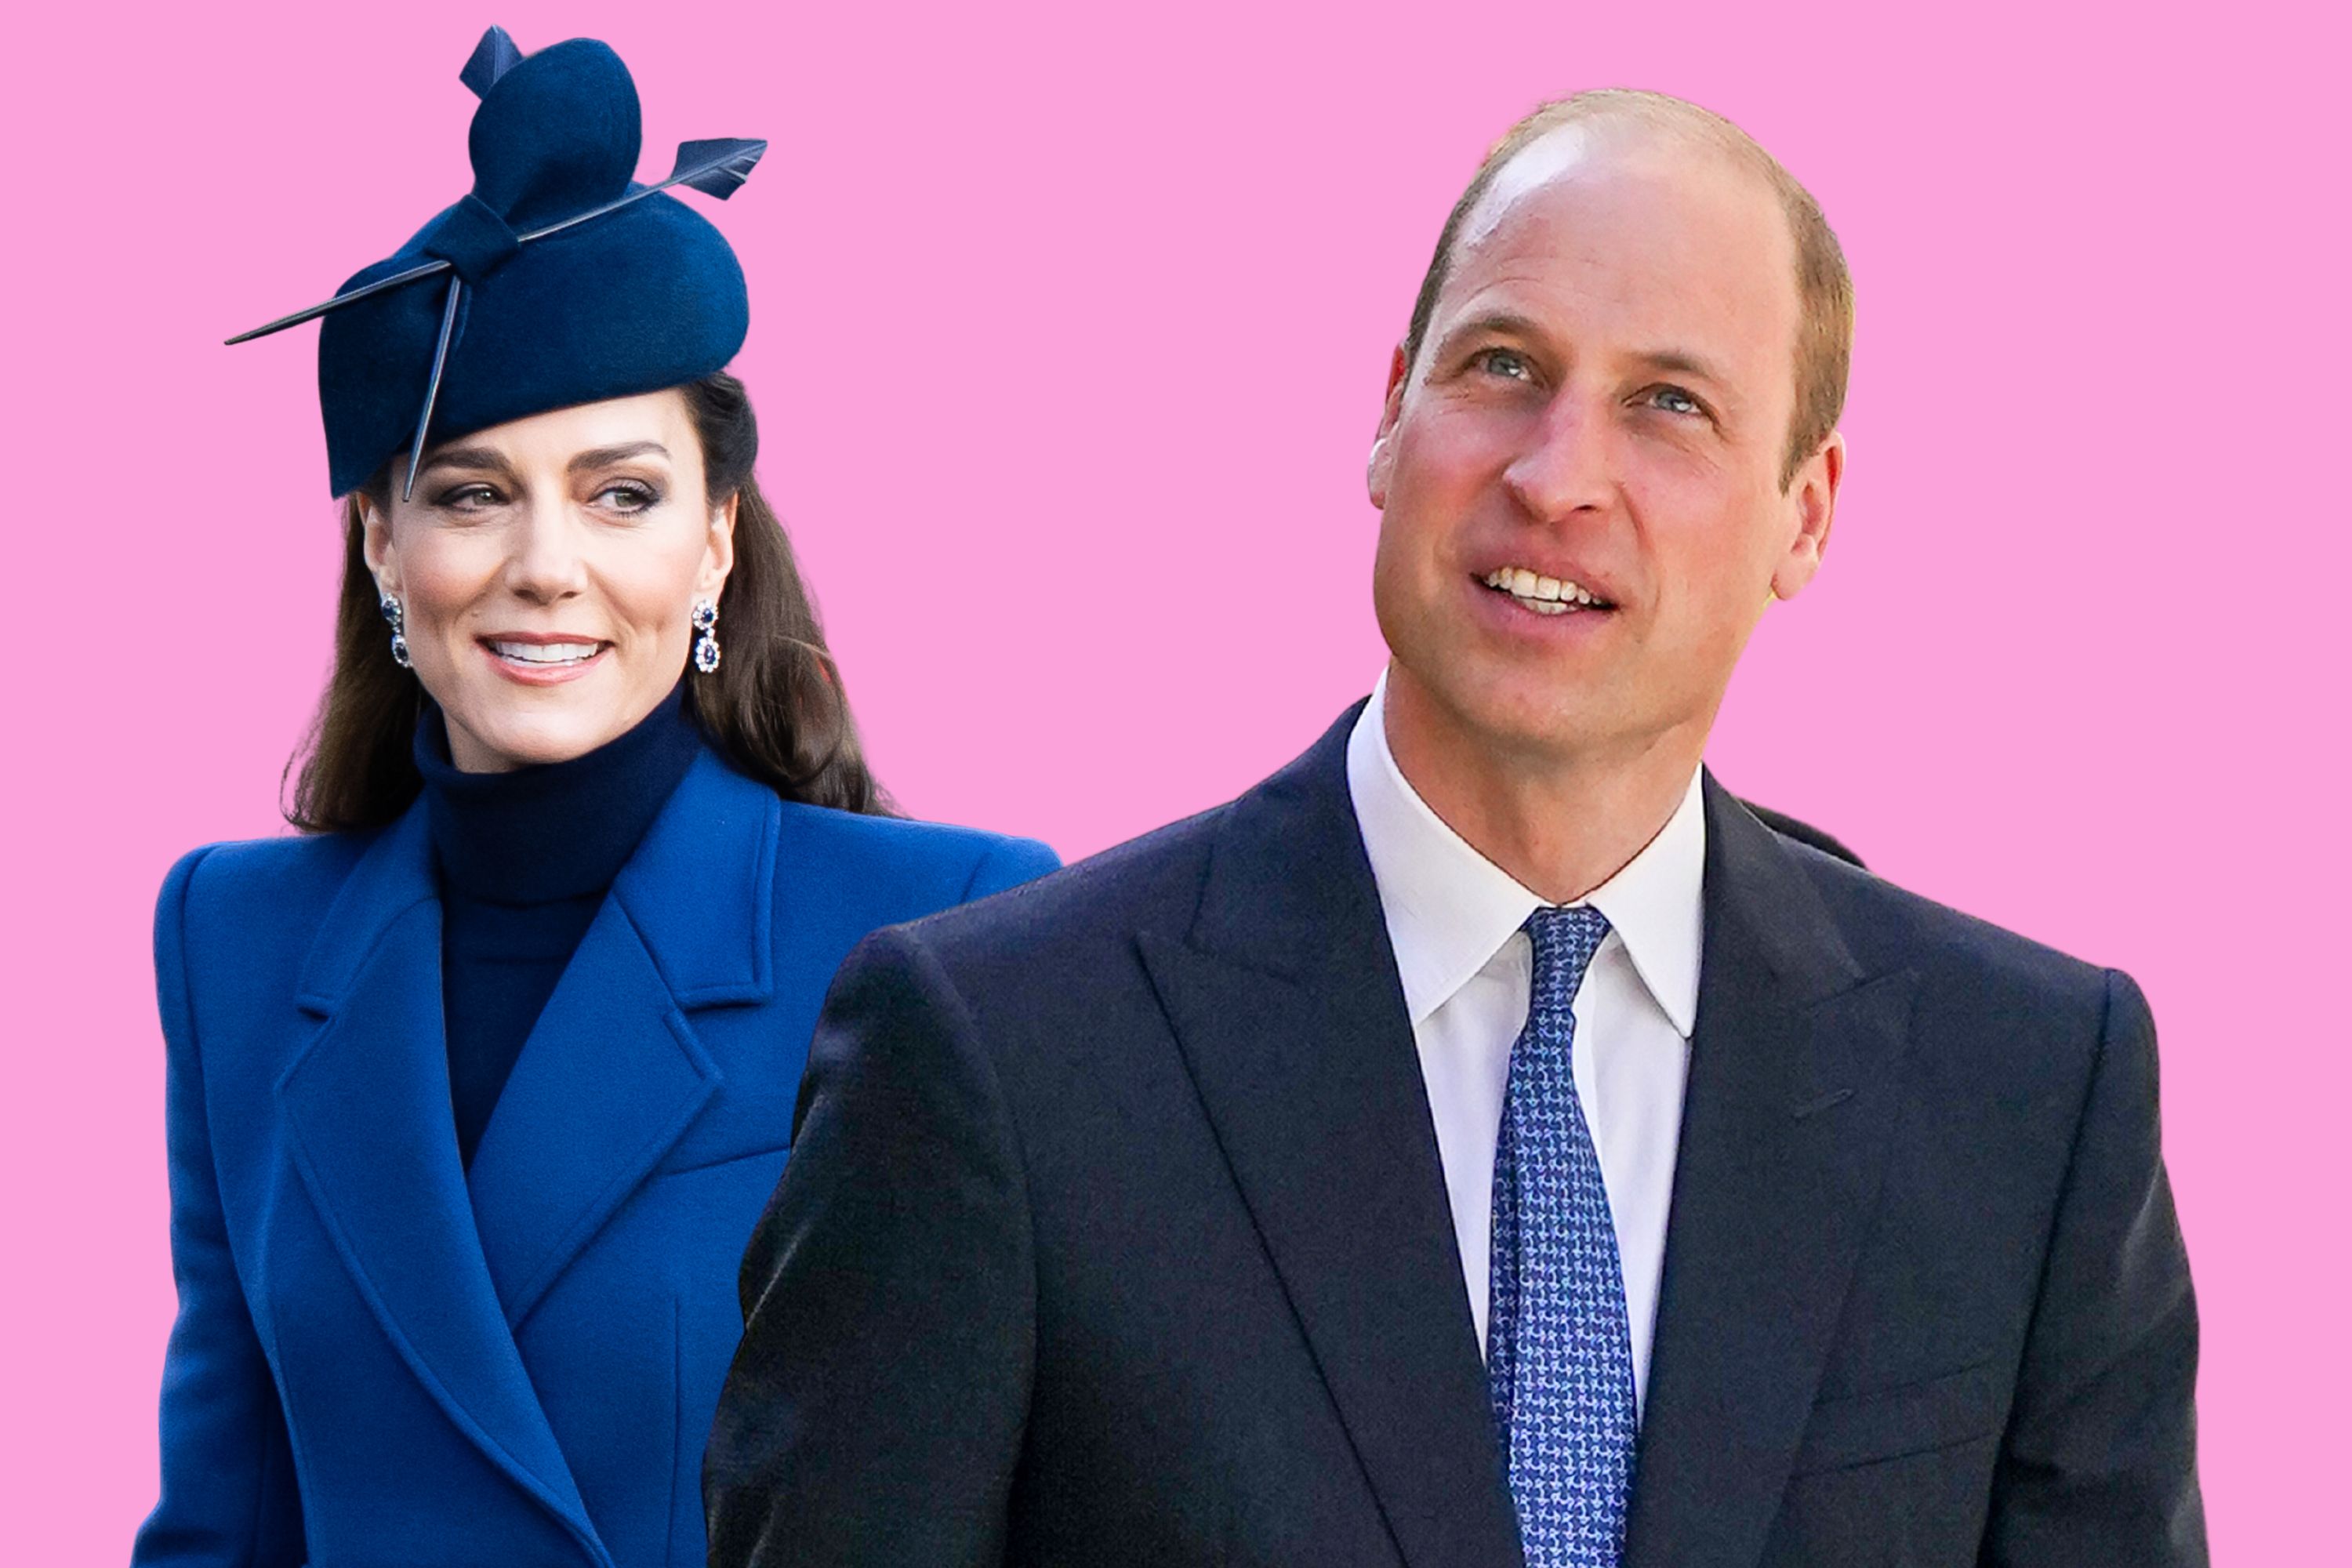 What Prince William said about Princess Kate’s cancer recovery